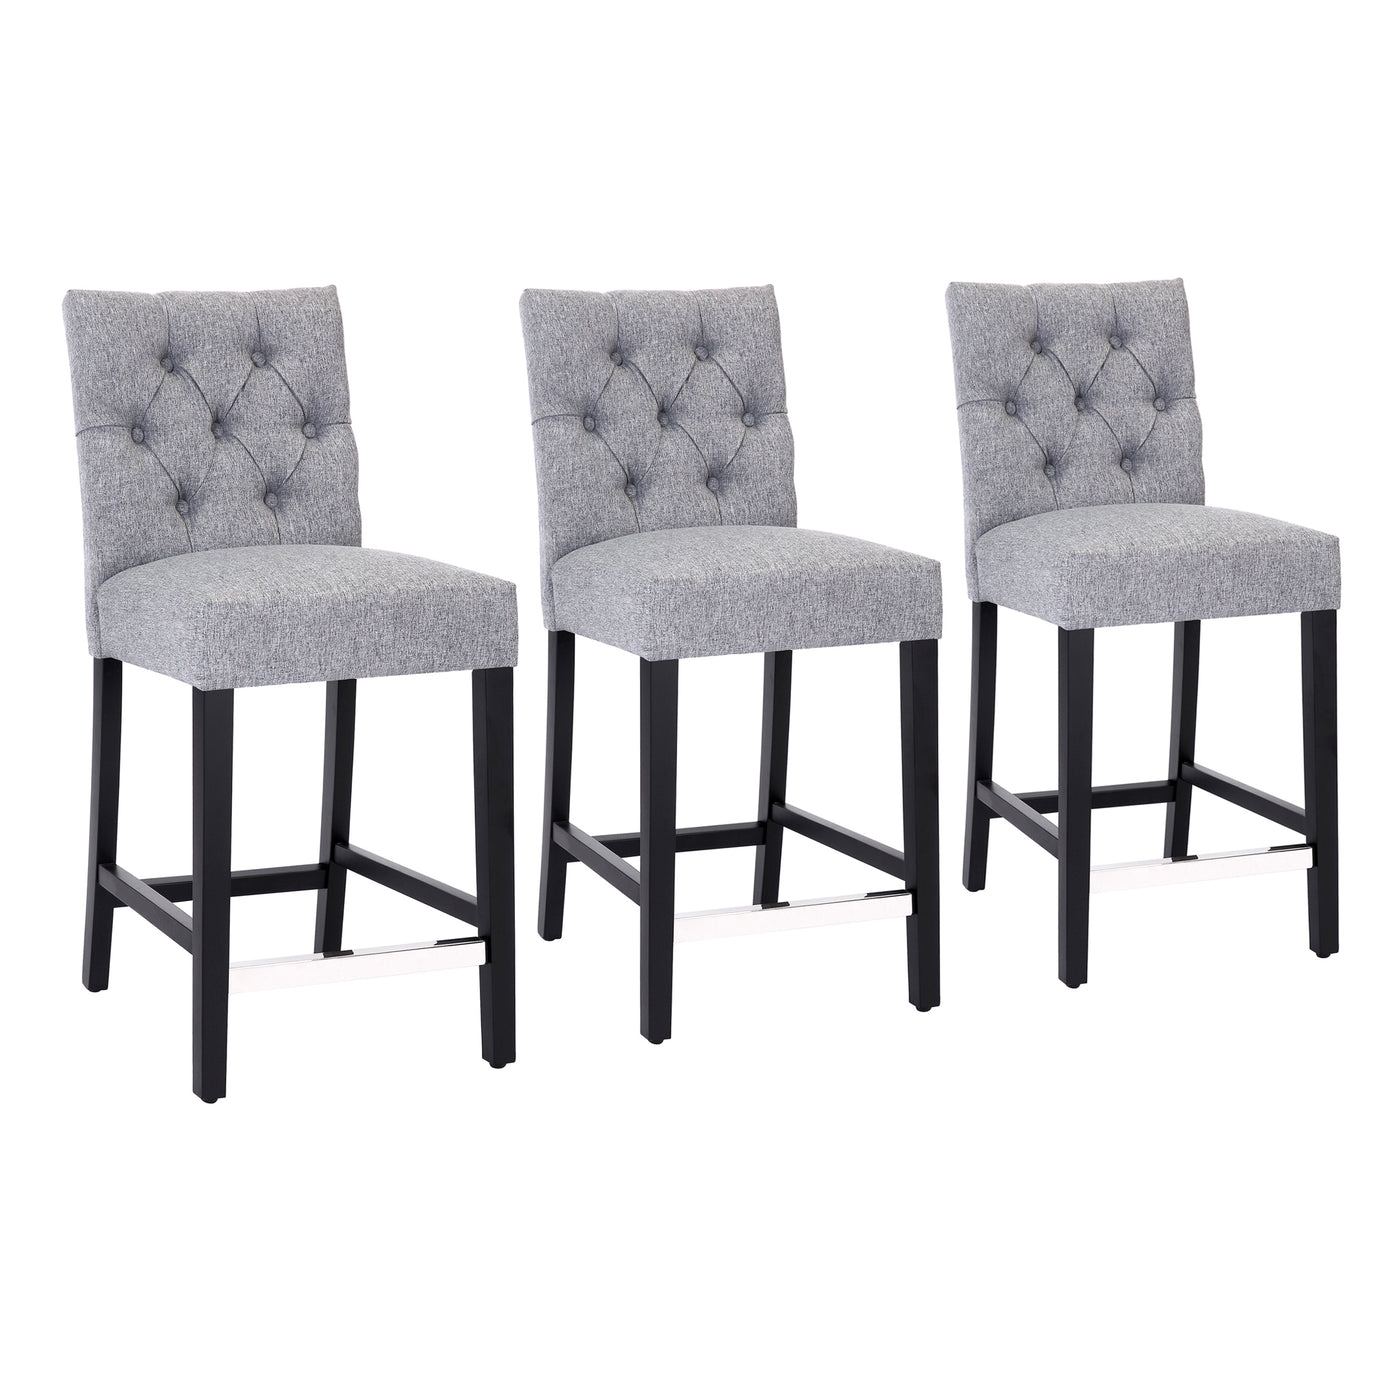 Hayes 24" Linen Fabric Tufted Counter Stool (Set of 3), Black